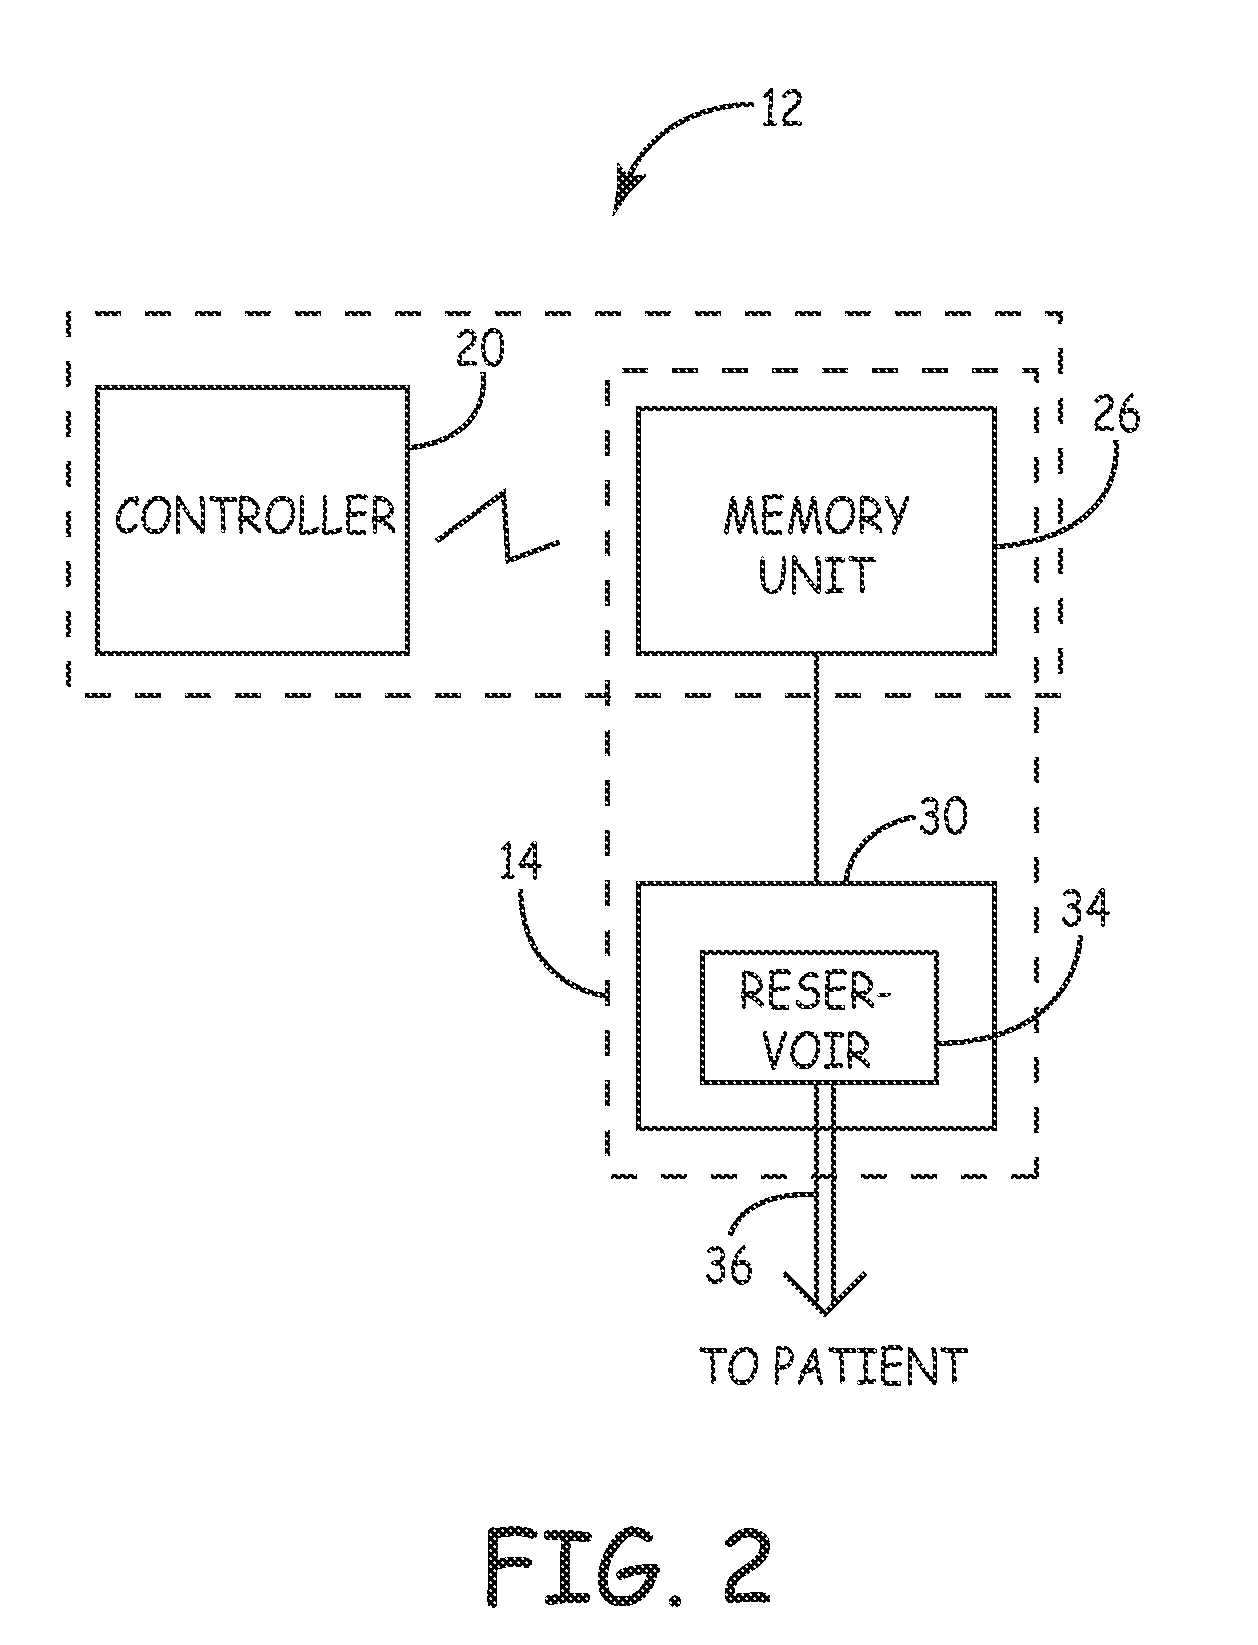 Interface for implantable medical device programming